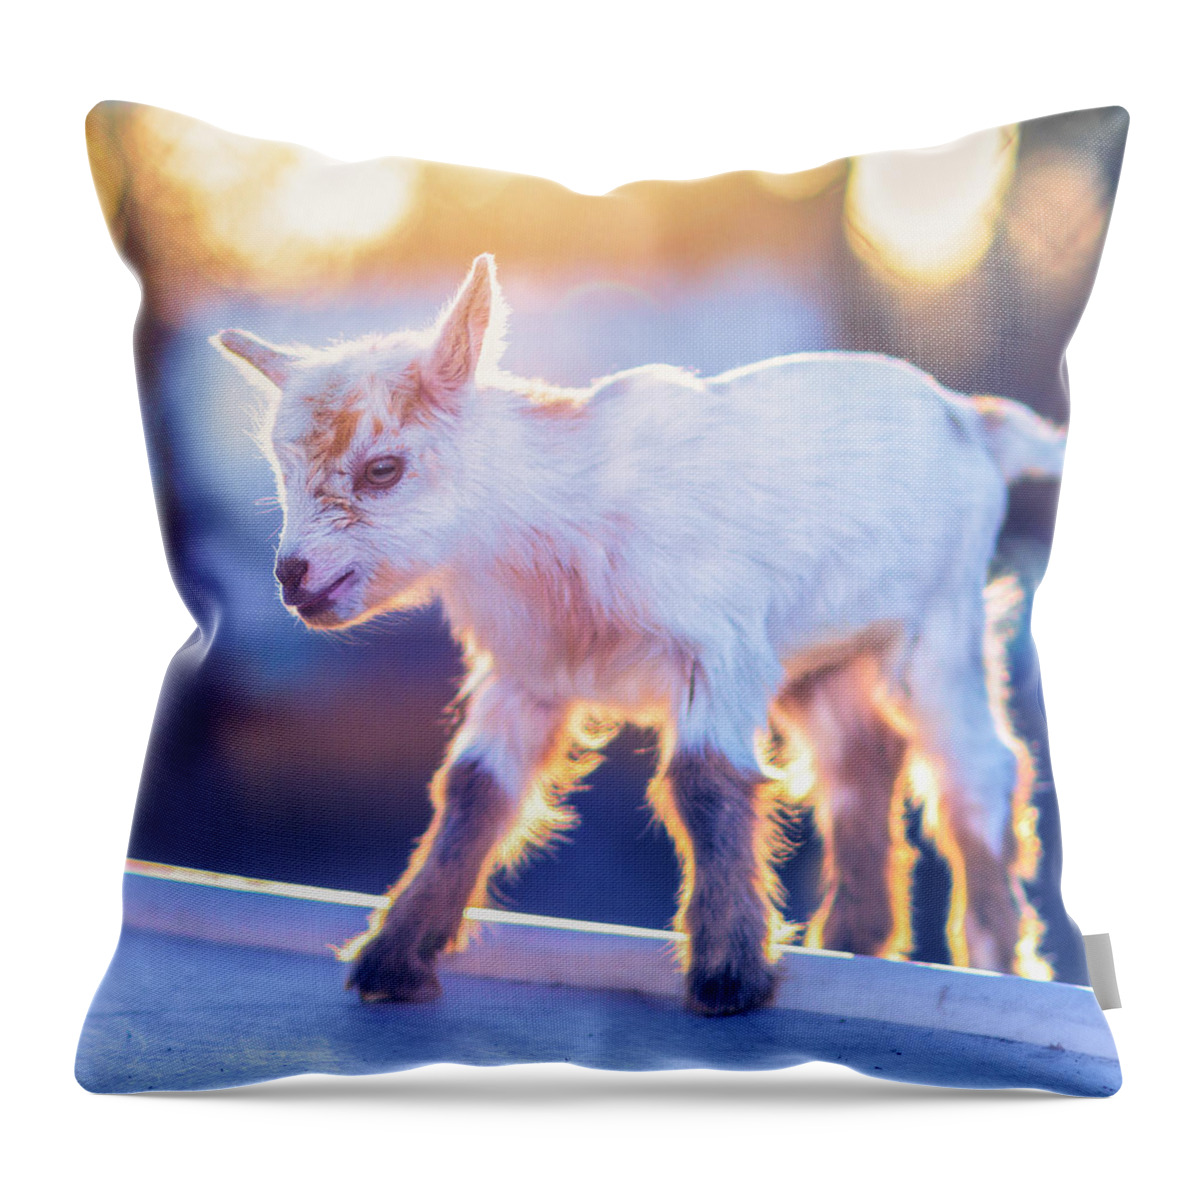 Goat Throw Pillow featuring the photograph Little Baby Goat Sunset by TC Morgan